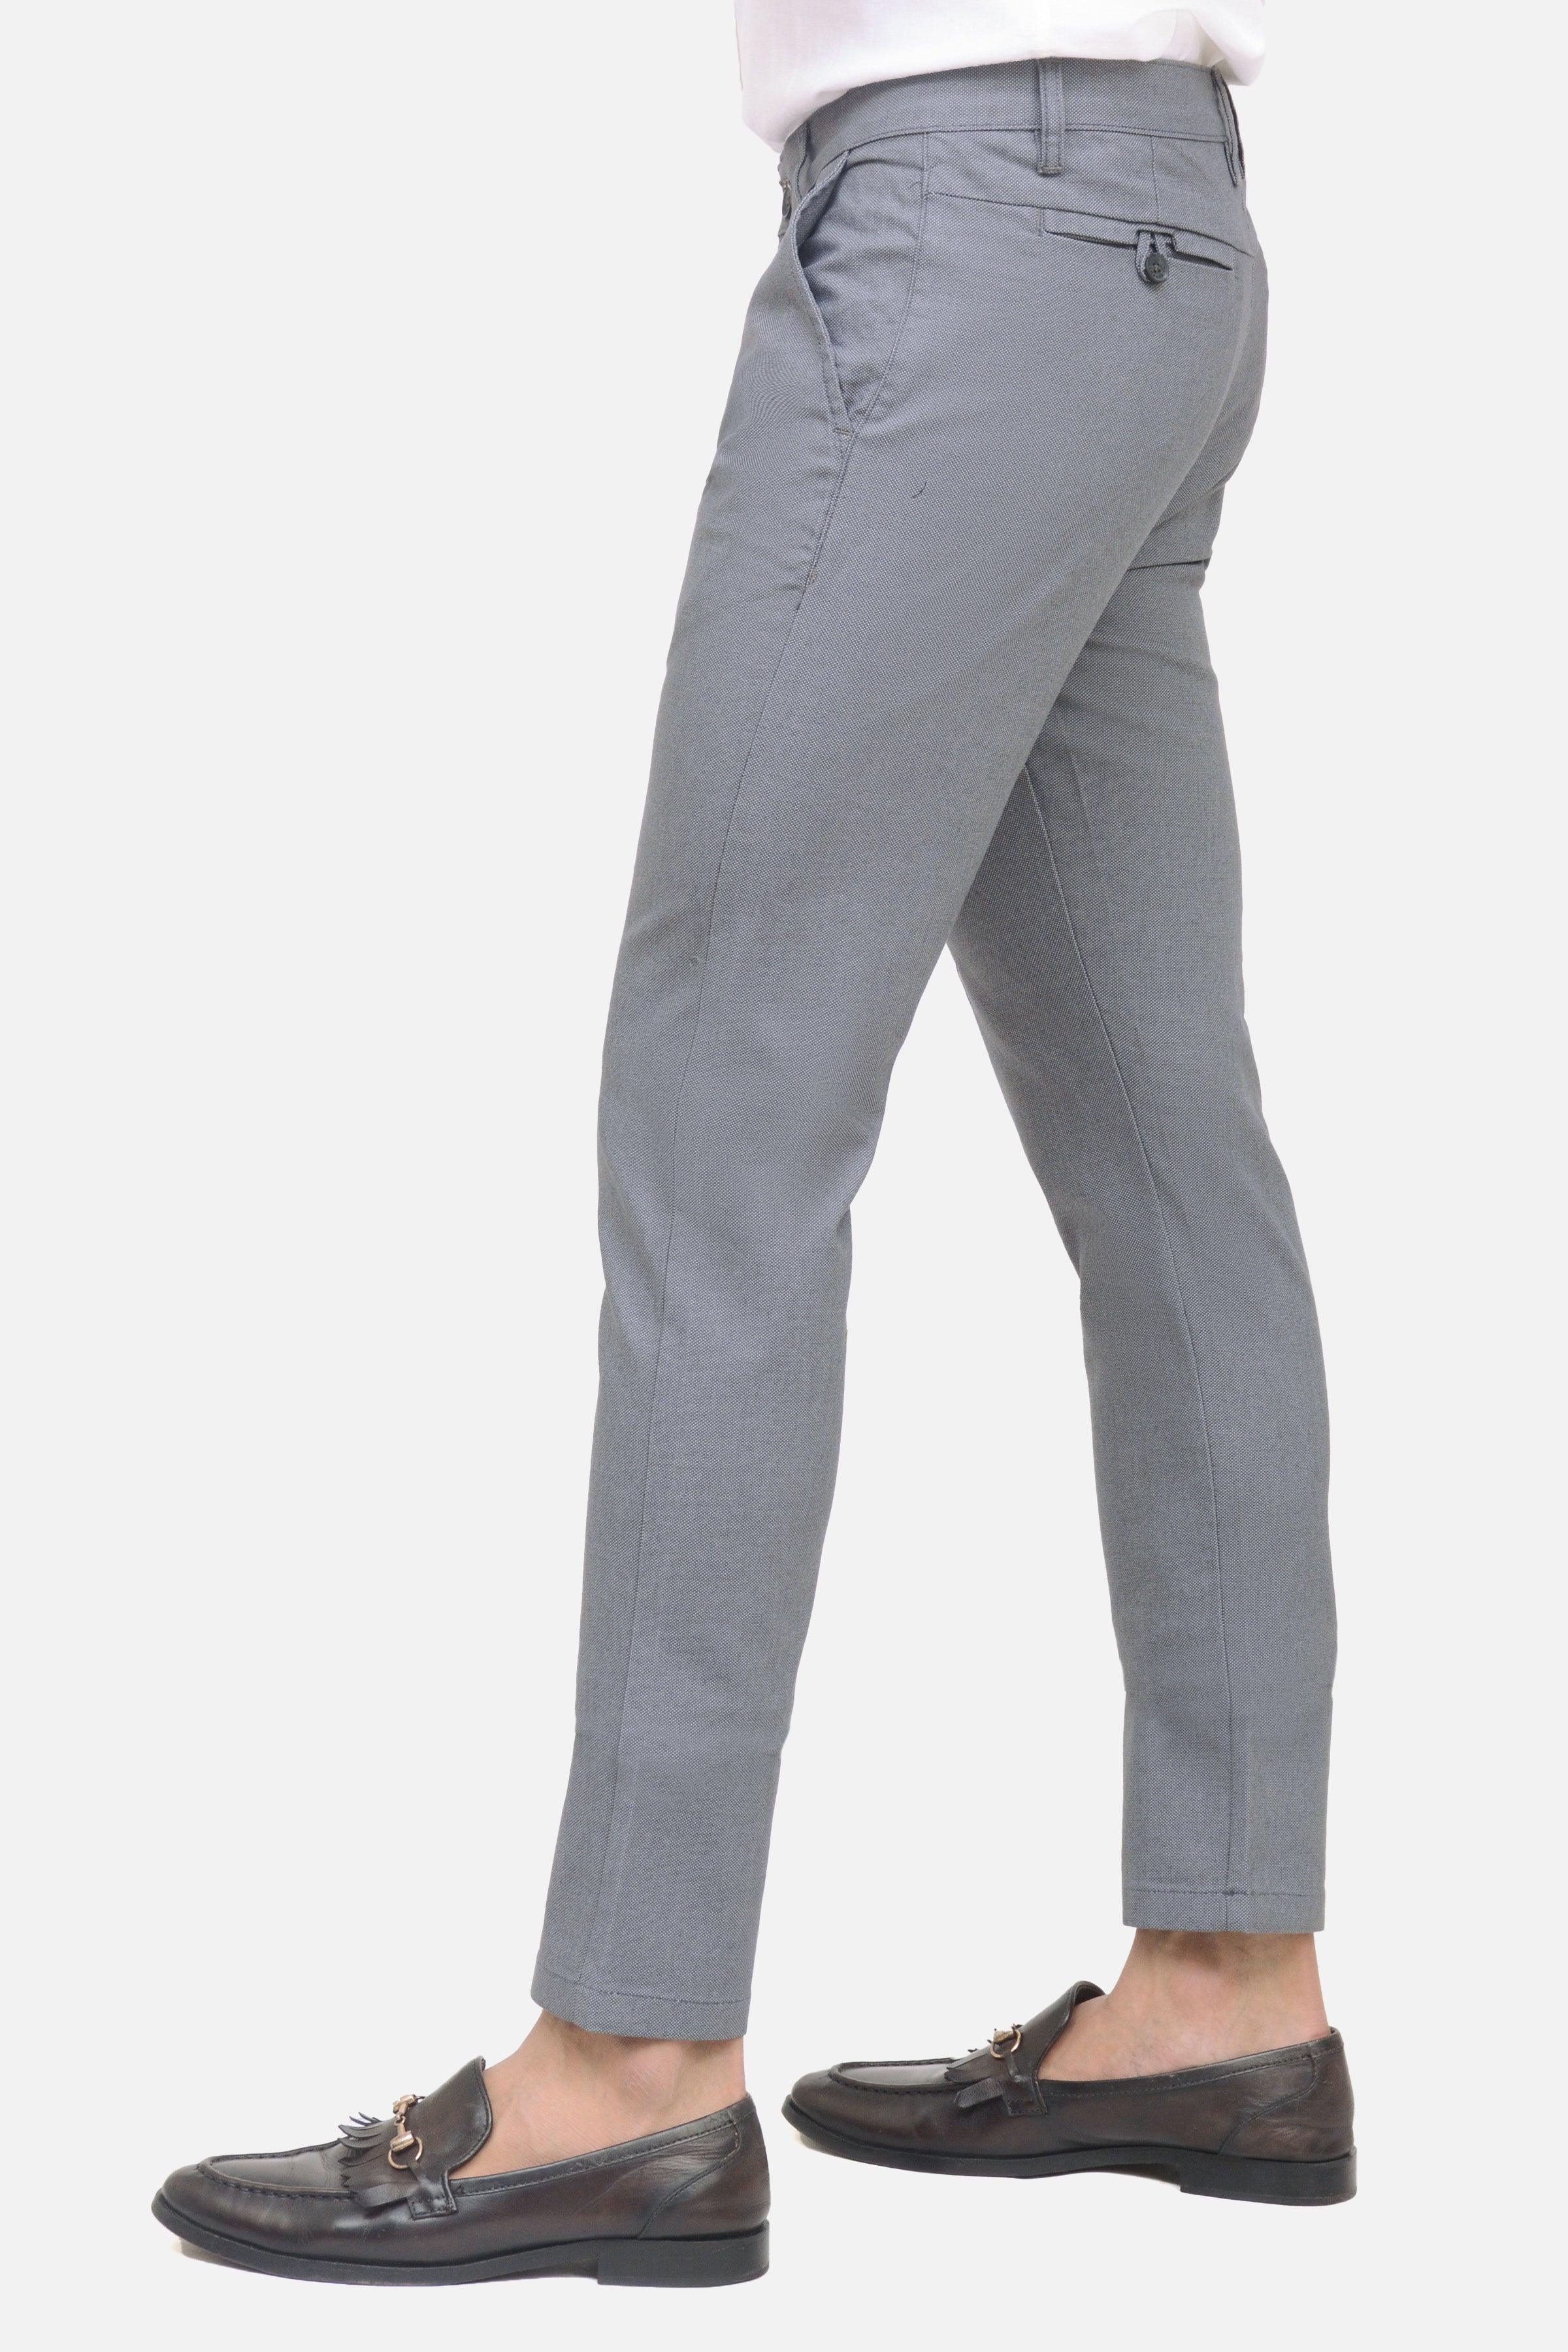 Mens Grey Formal Trousers | Charcoal Grey Formal Trousers | Next